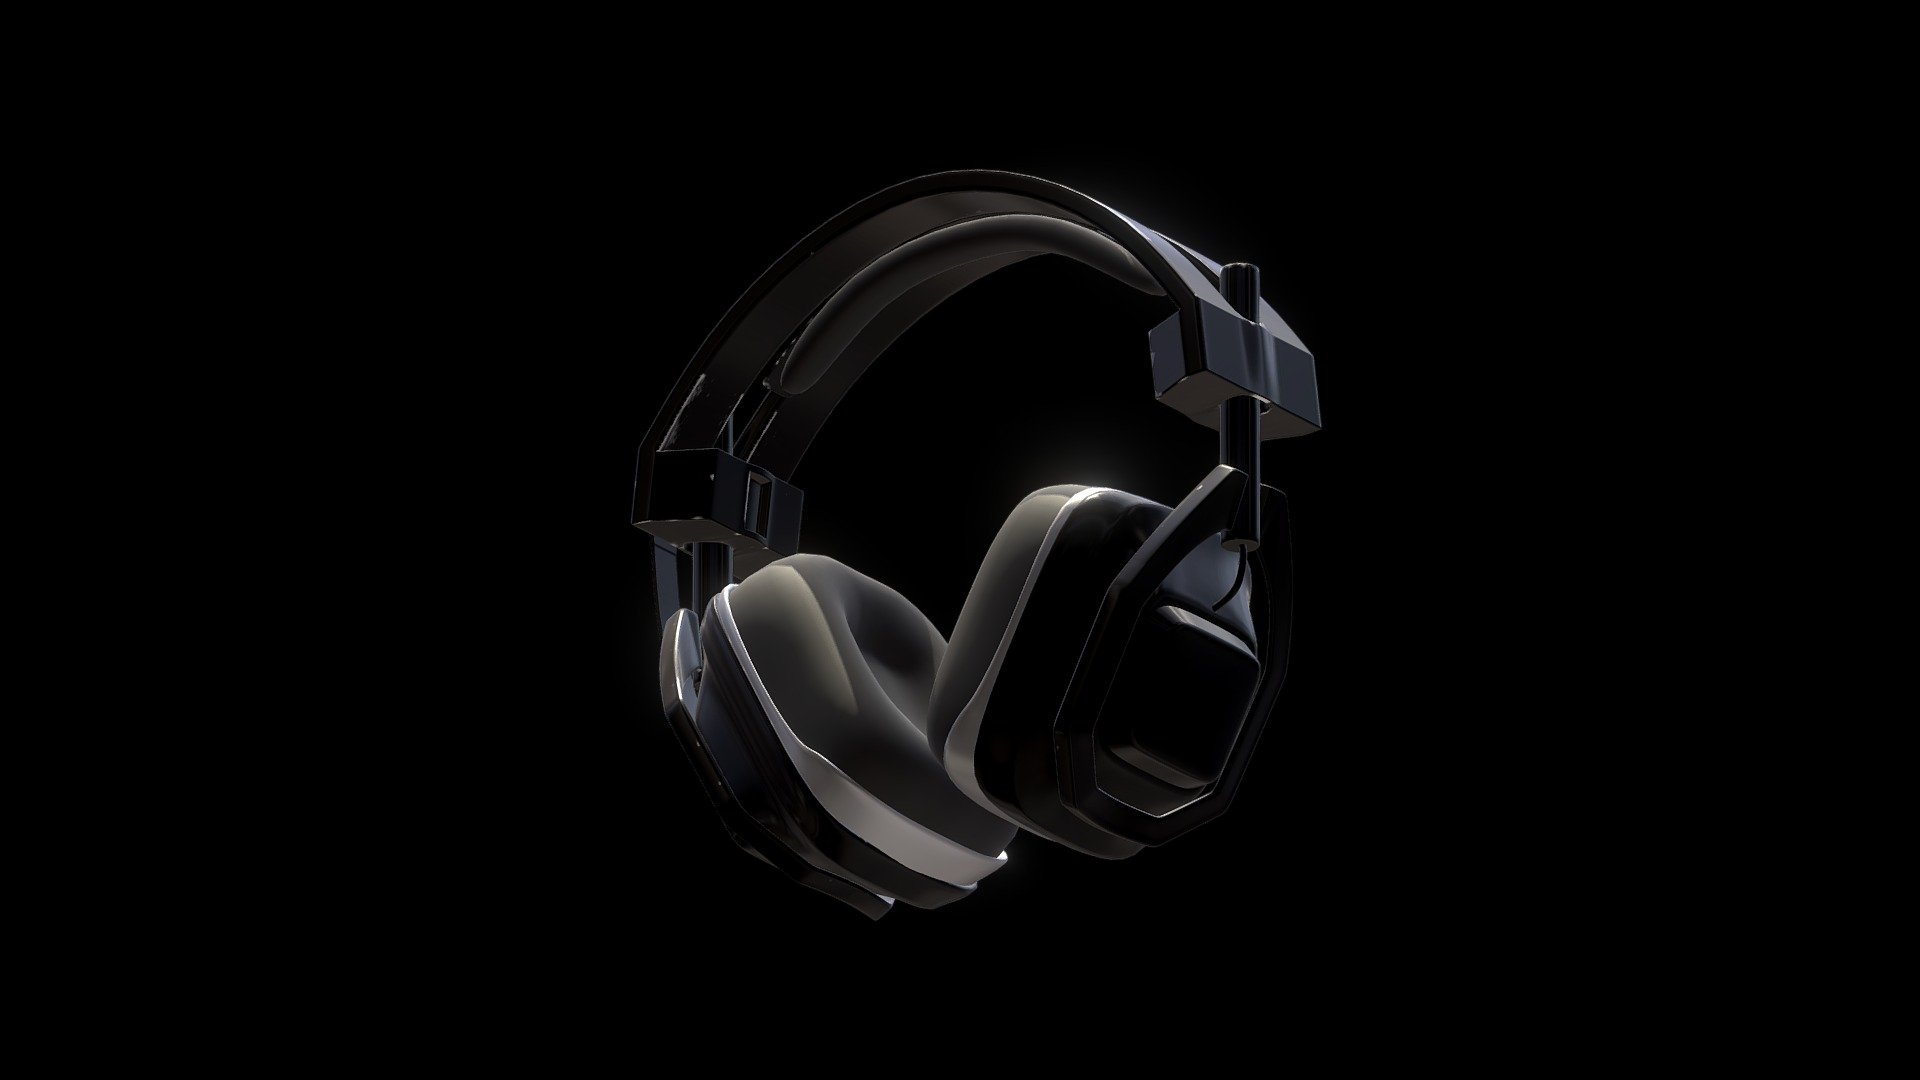 A little simplified model created based in Astro A50 - Headset Astro A50 (almost) - 3D model by zbrcm (@zebrazerando) 3d model